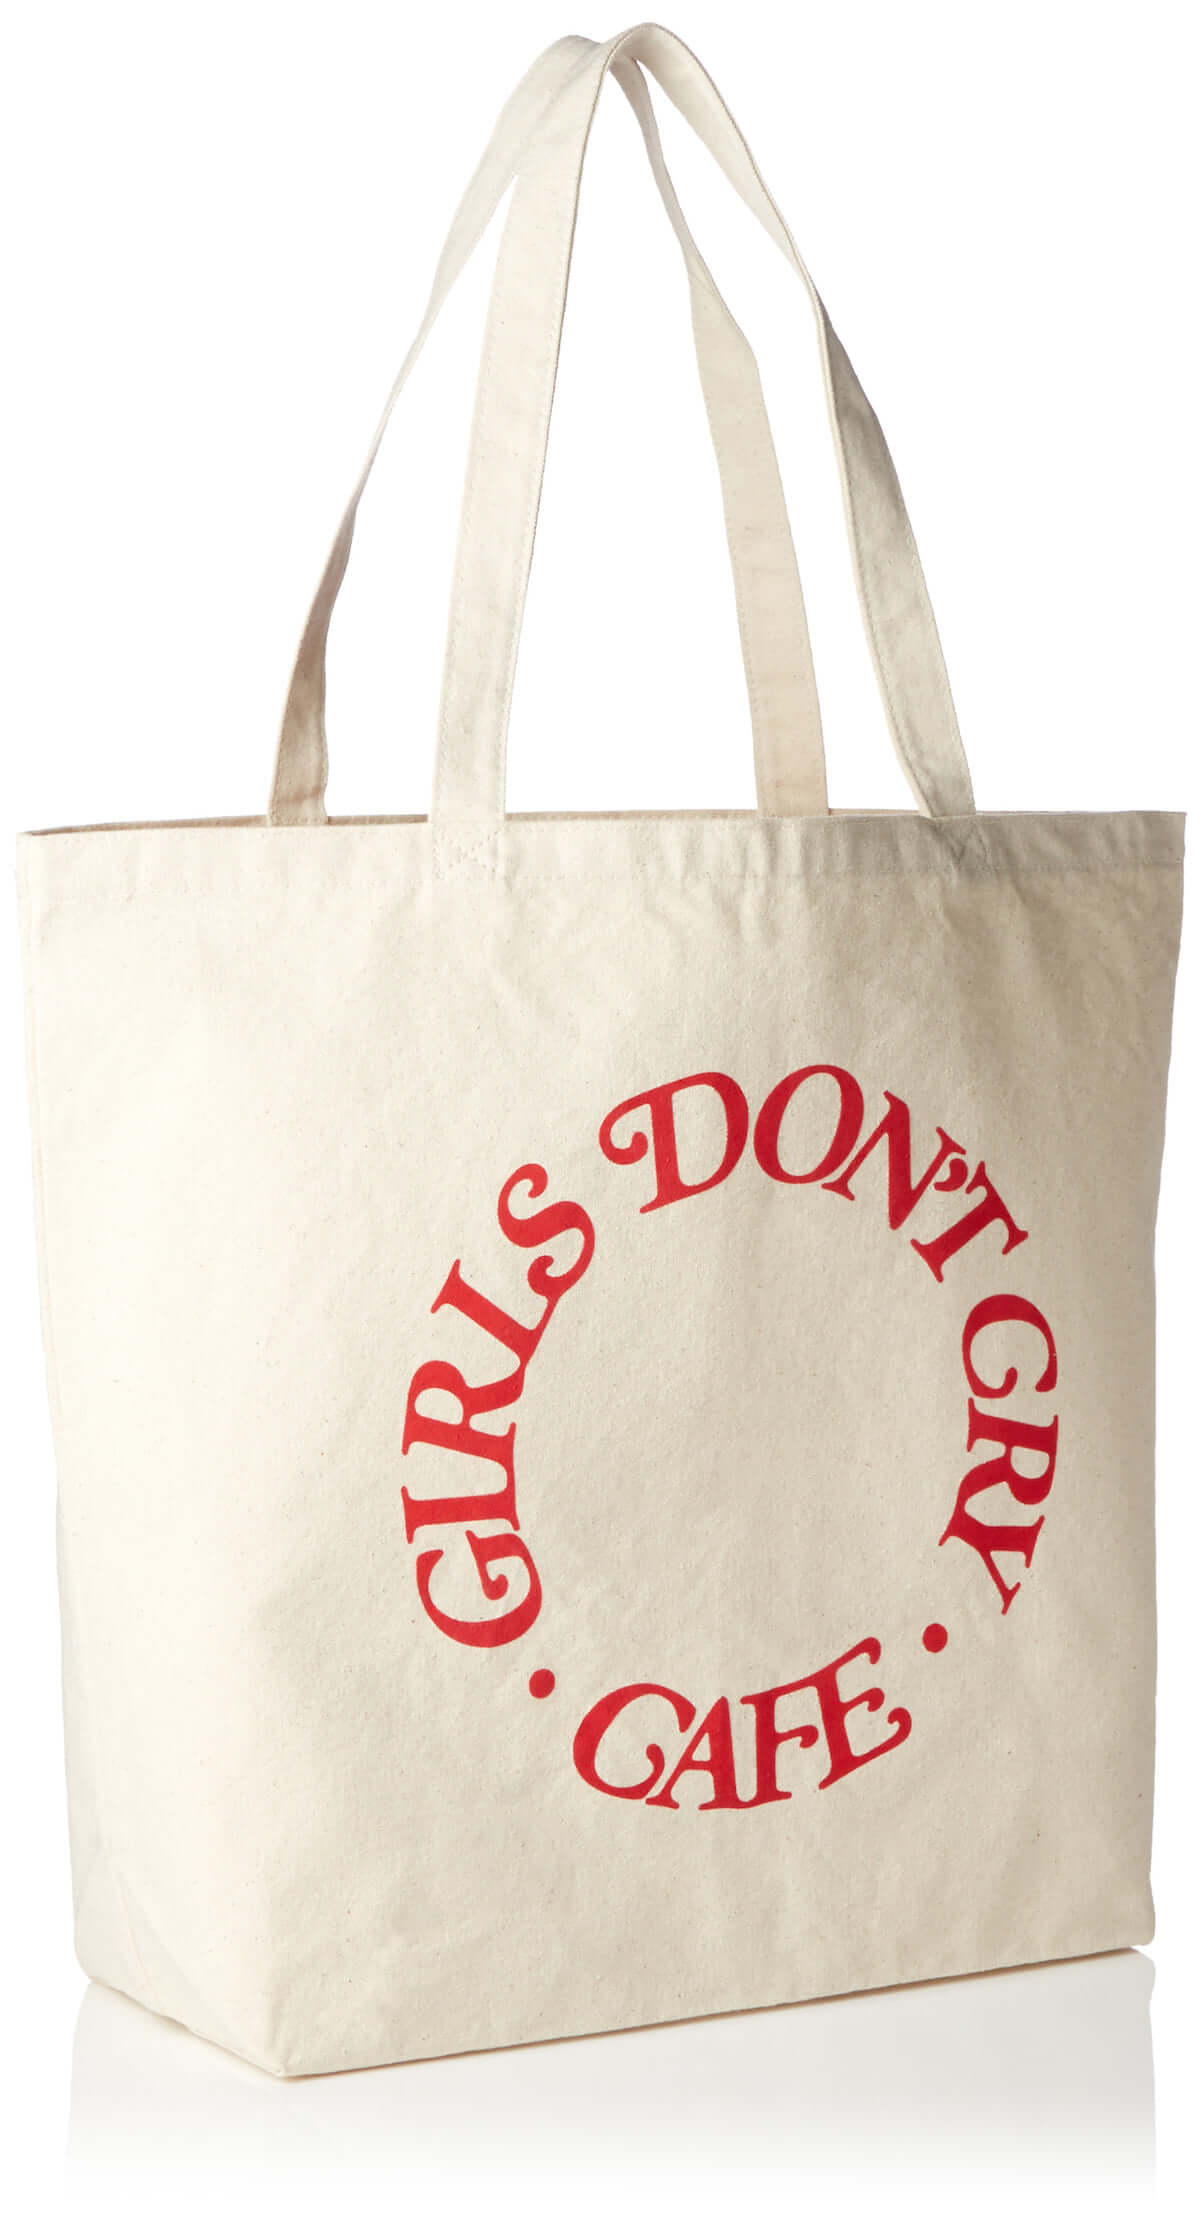 Girls Don’t Cry Meets Amazon Fashion “AT TOKYO”